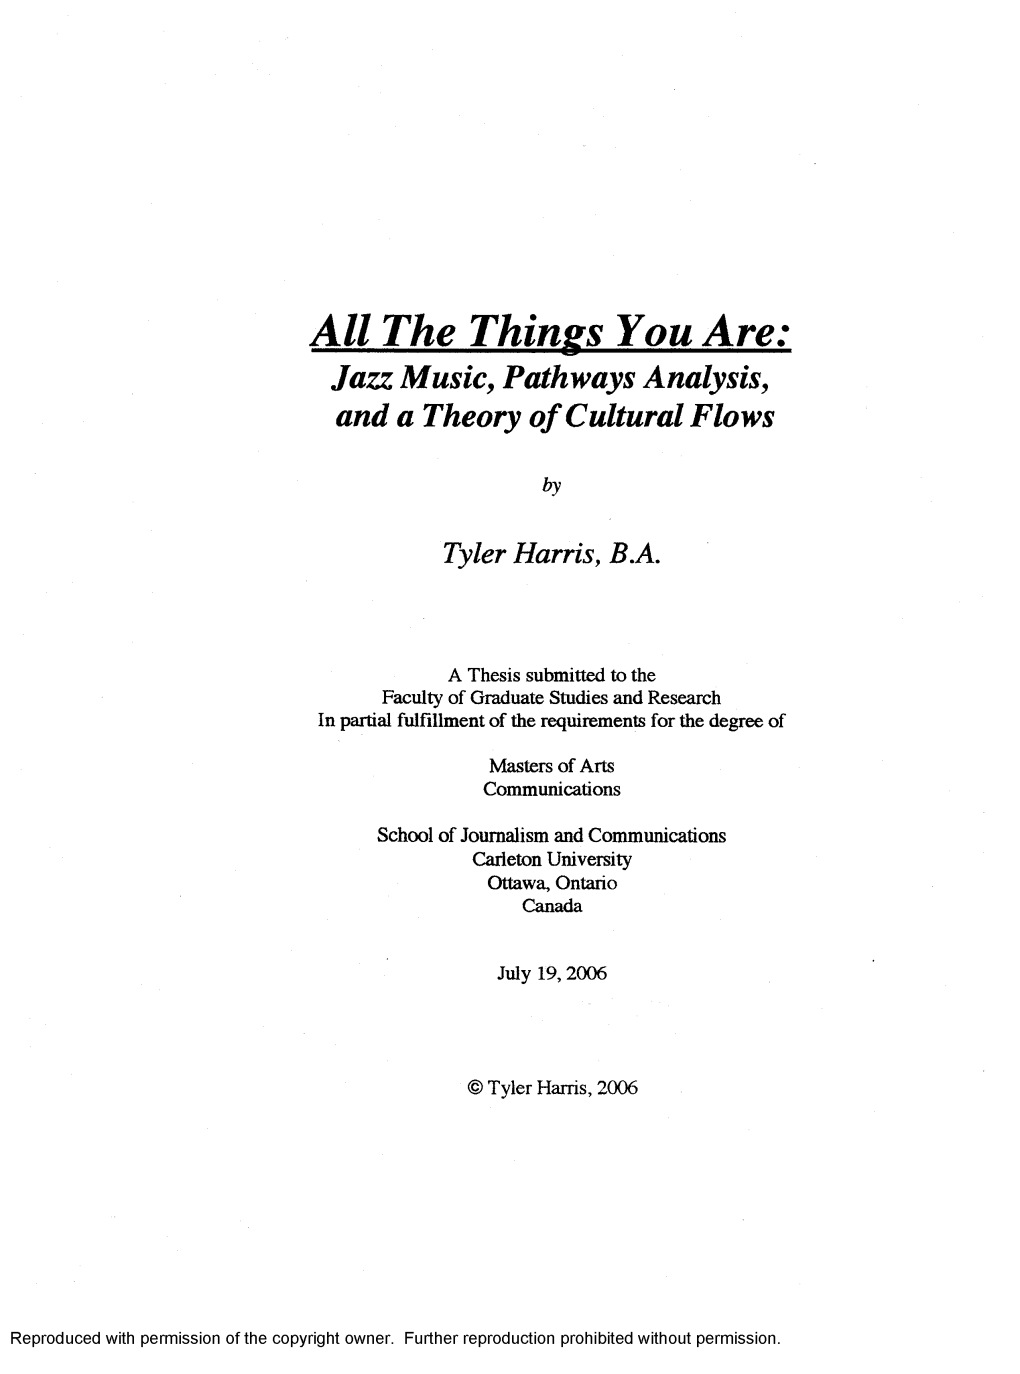 All the Things You Are: Jazz Music, Pathways Analysis, and a Theory of Cultural Flows